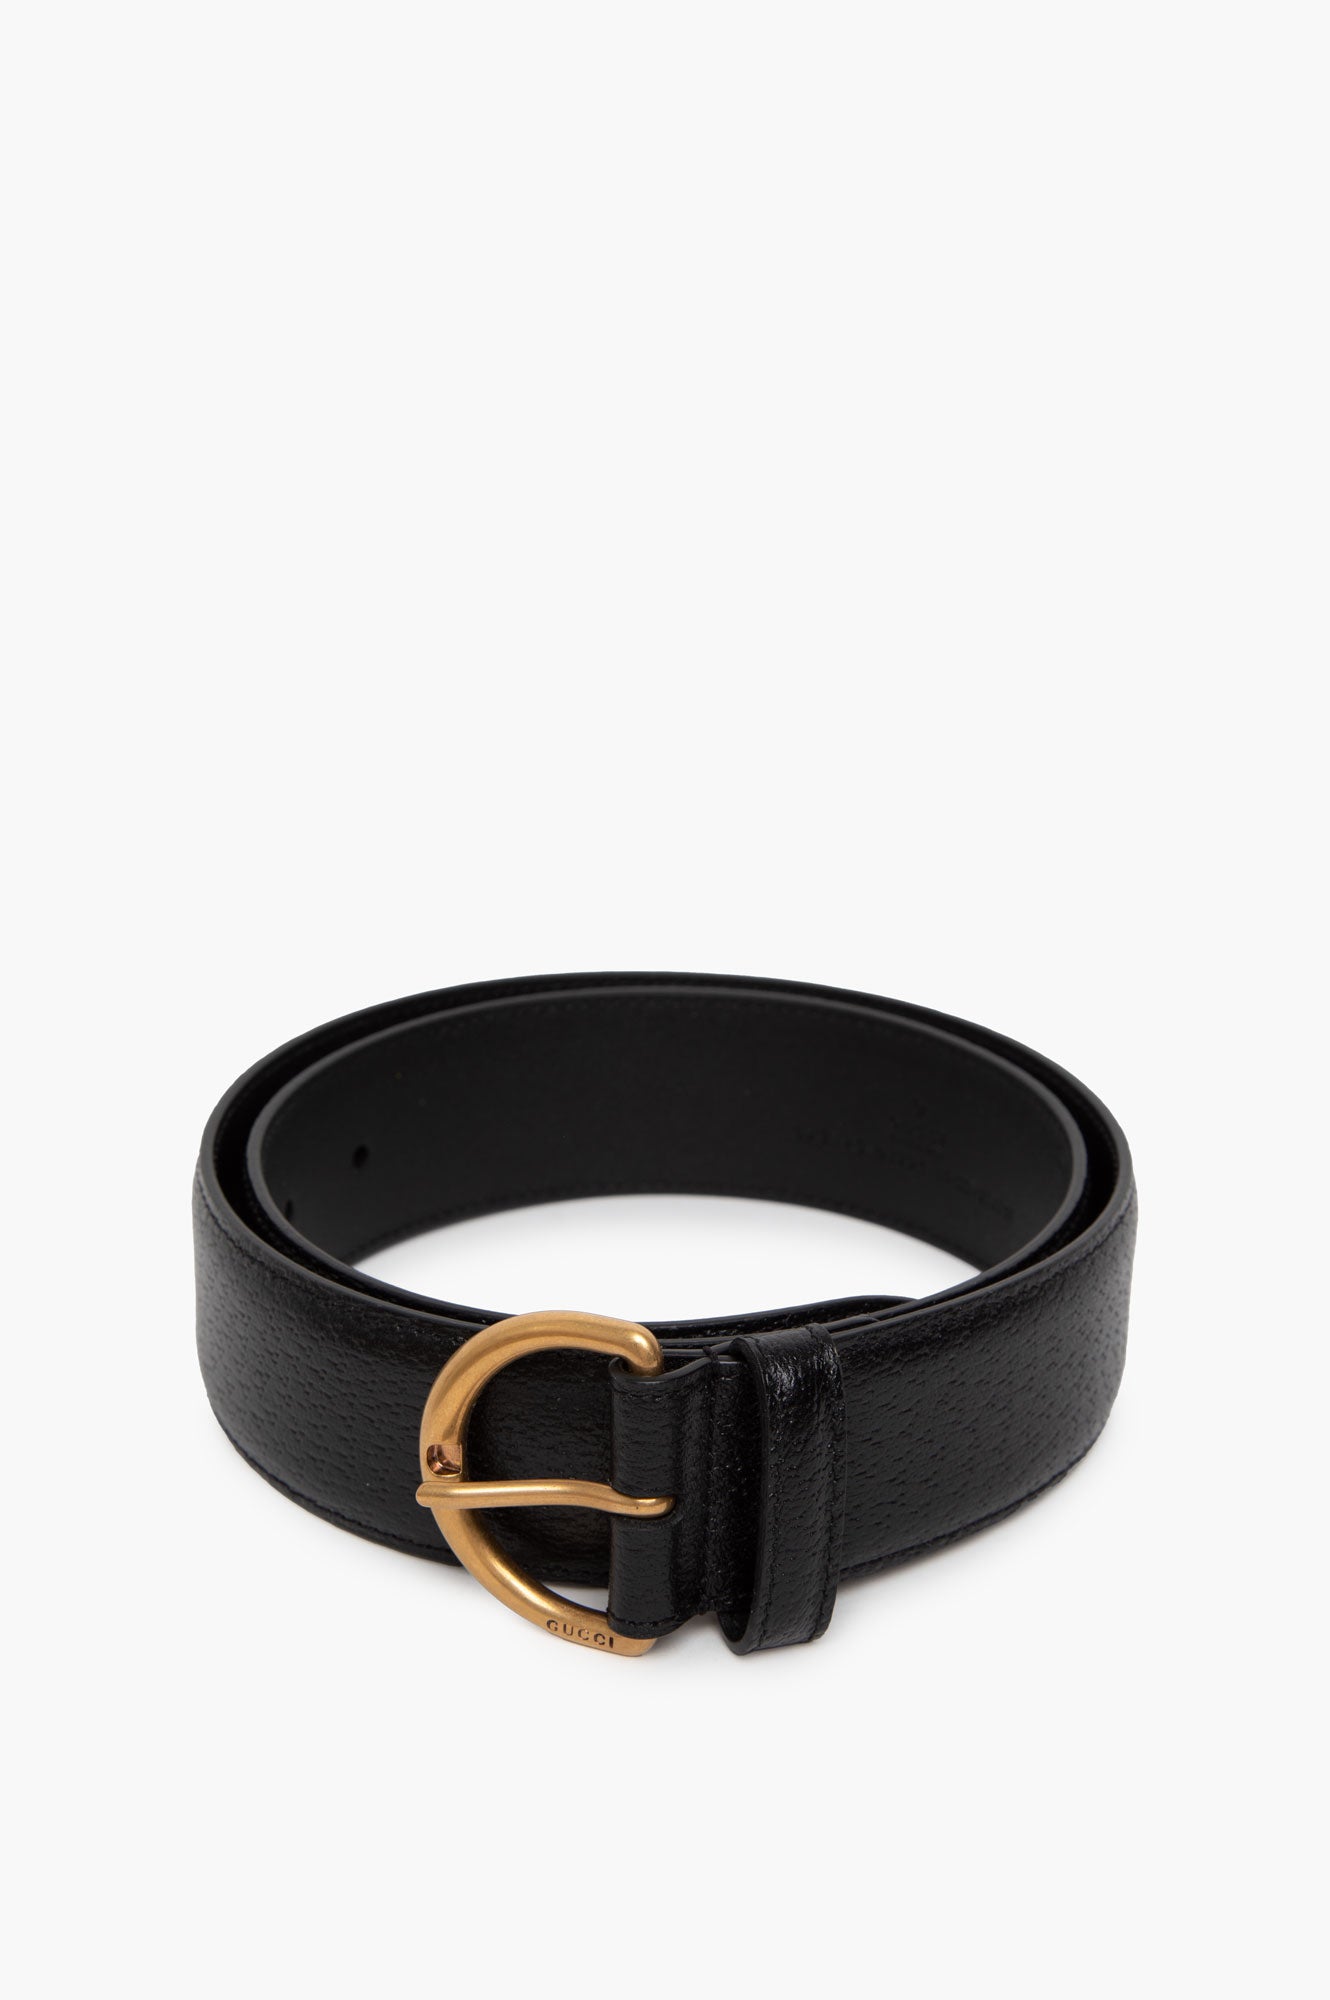 Gucci Black Leather Belt with Gold Buckle 80cm